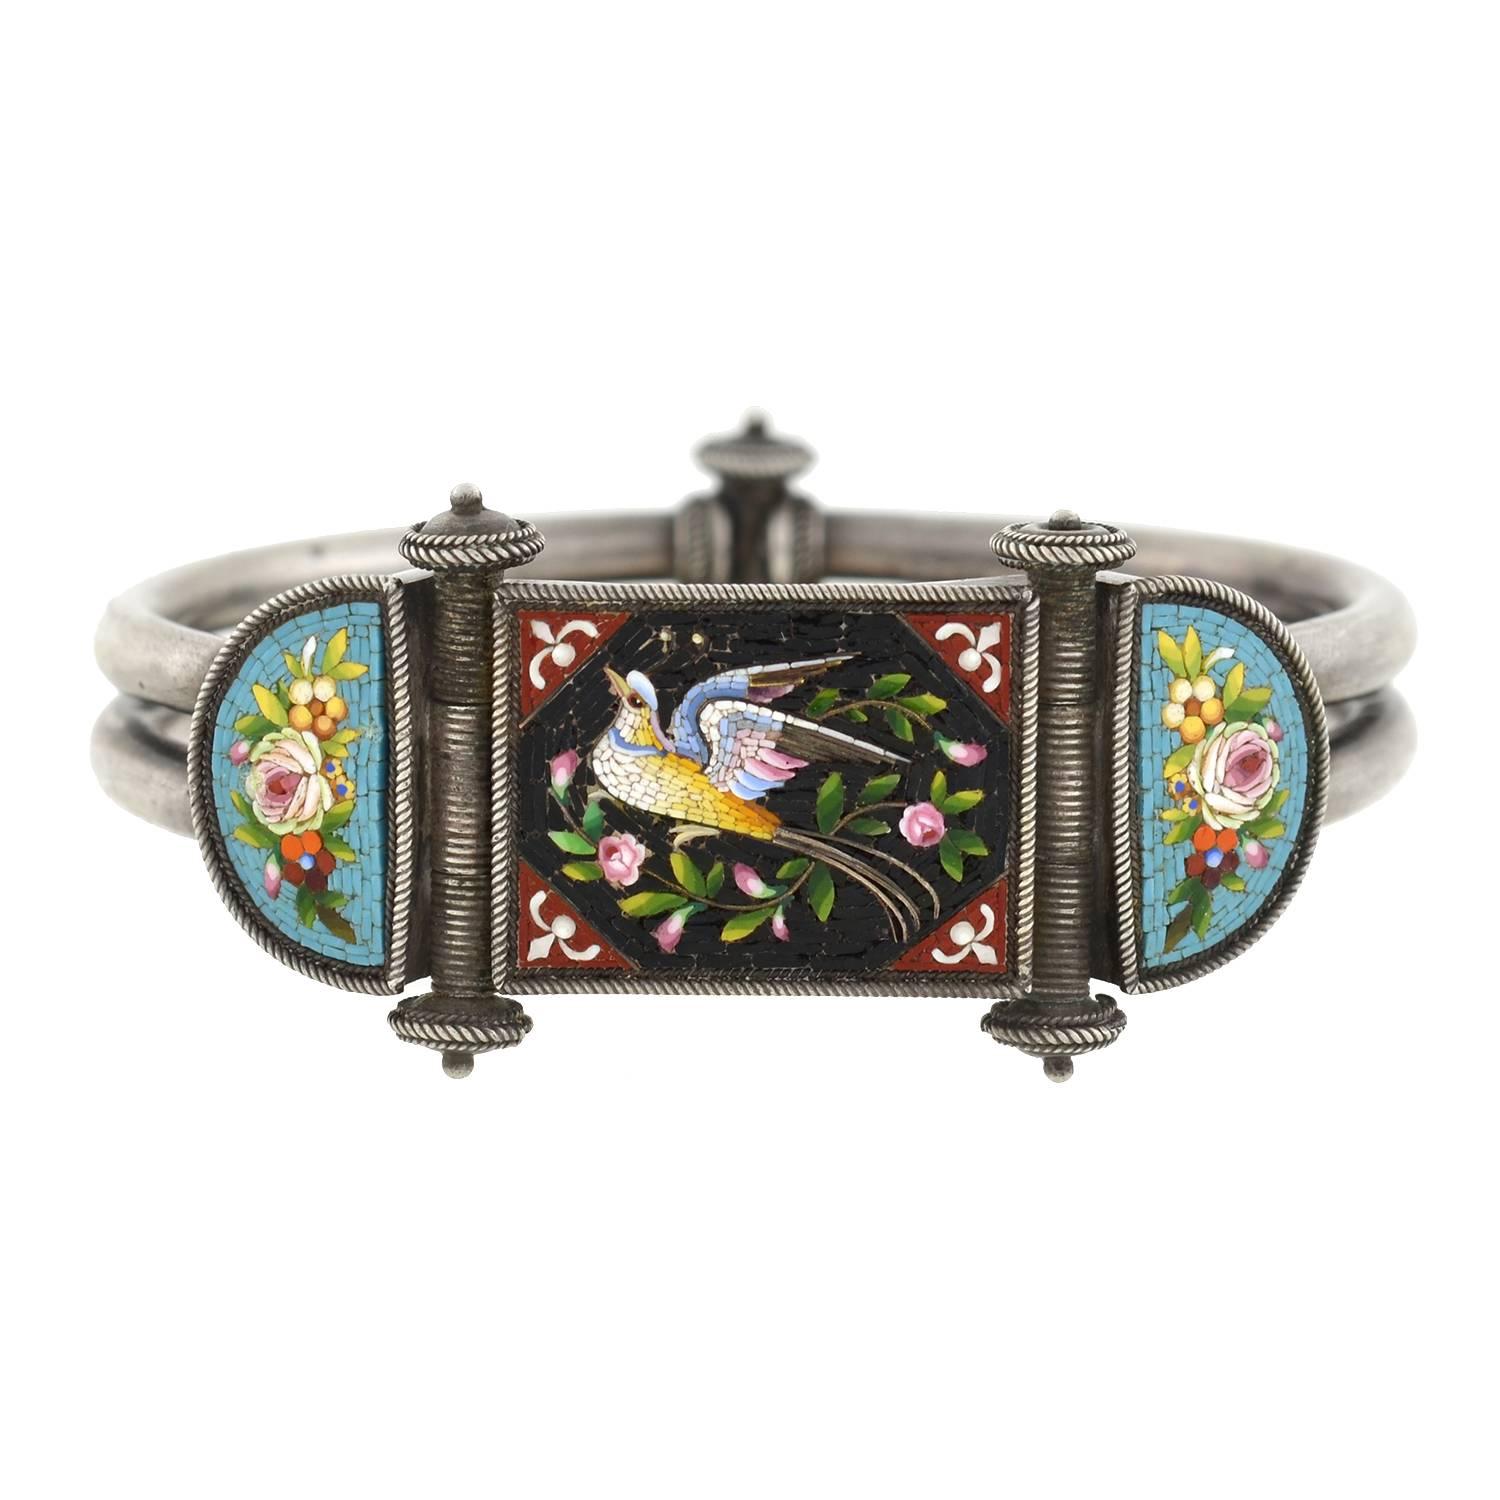 A fantastic and unusual micro mosaic bracelet from the Victorian (ca1880) era! Made of sterling silver, the bangle style bracelet is comprised of two tubular links, which form the band of the bracelet. At the front is a marvelous micro mosaic design